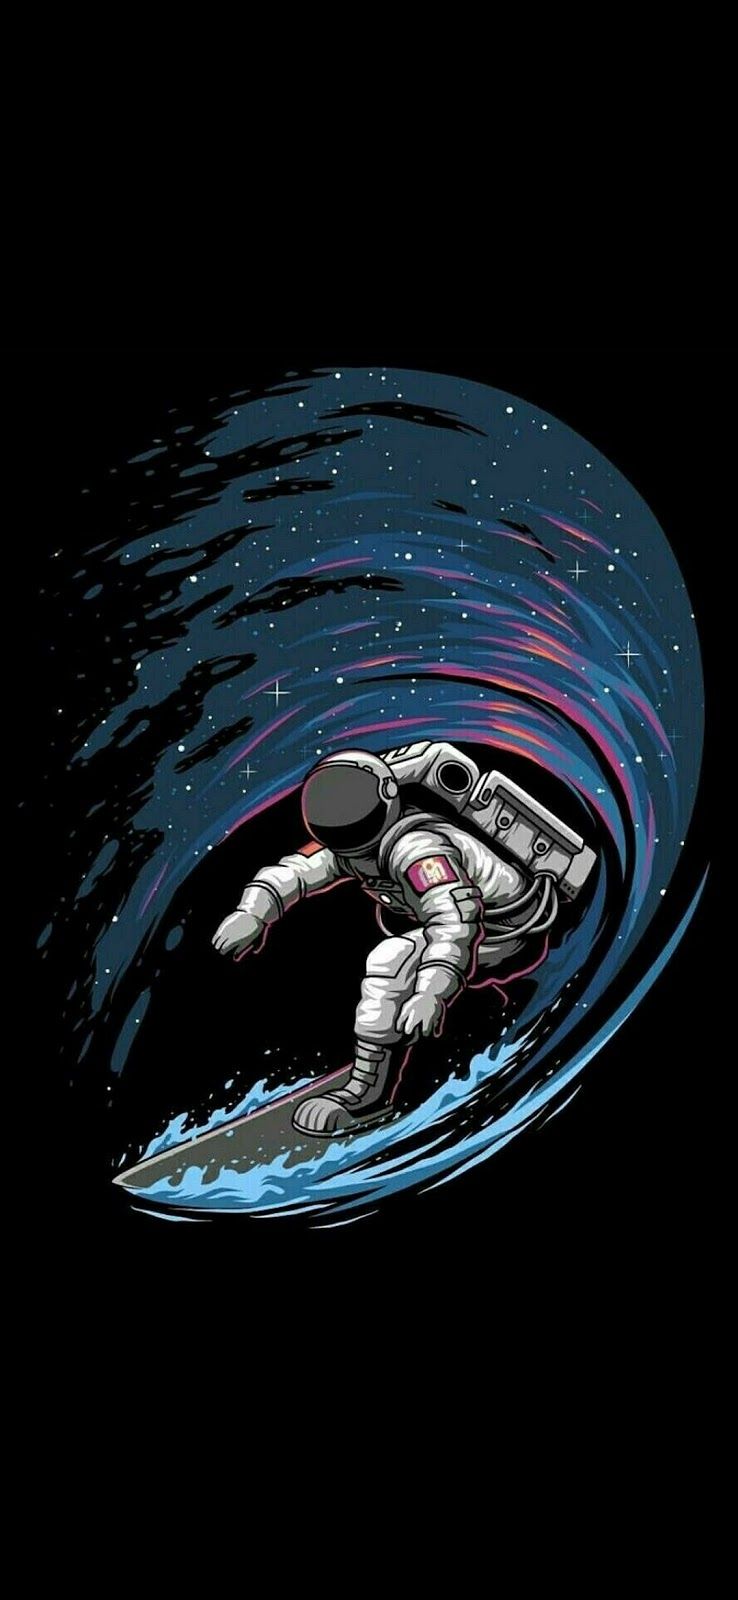 Astronaut Surfing in space Mobile Wallpaper Mobile Walls